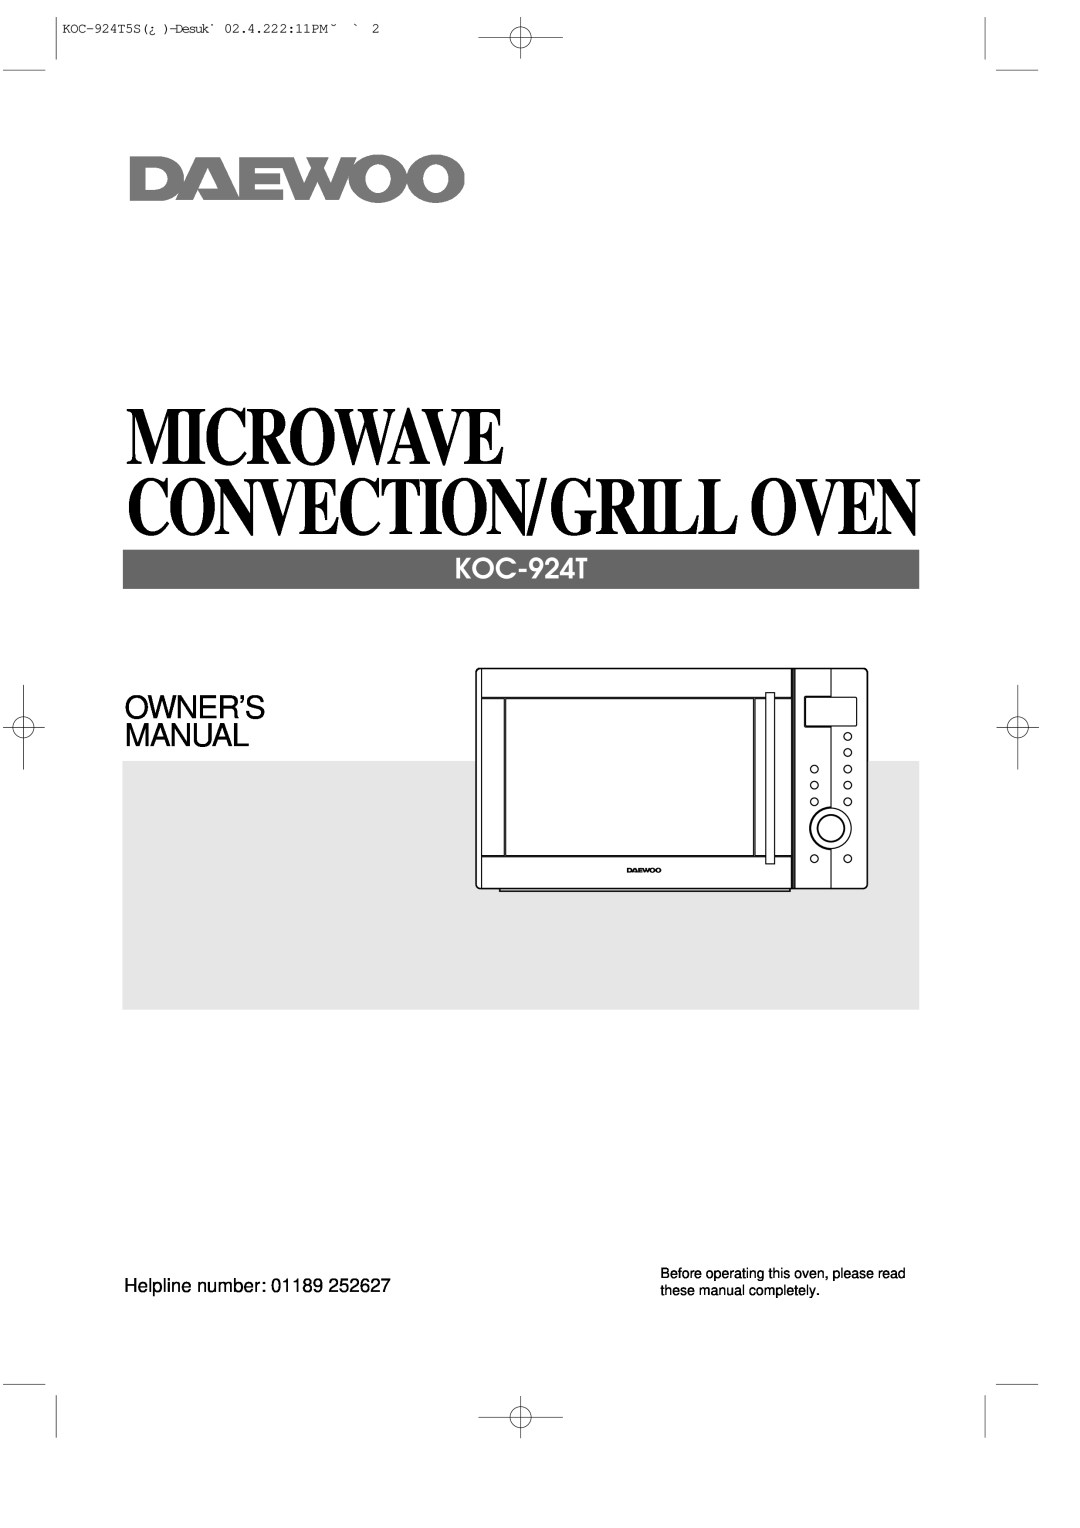 Daewoo owner manual Microwave Convection/Grill Oven, KOC-924T5S¿ -Desuk˙ 02.4.22211PM˘ ` 